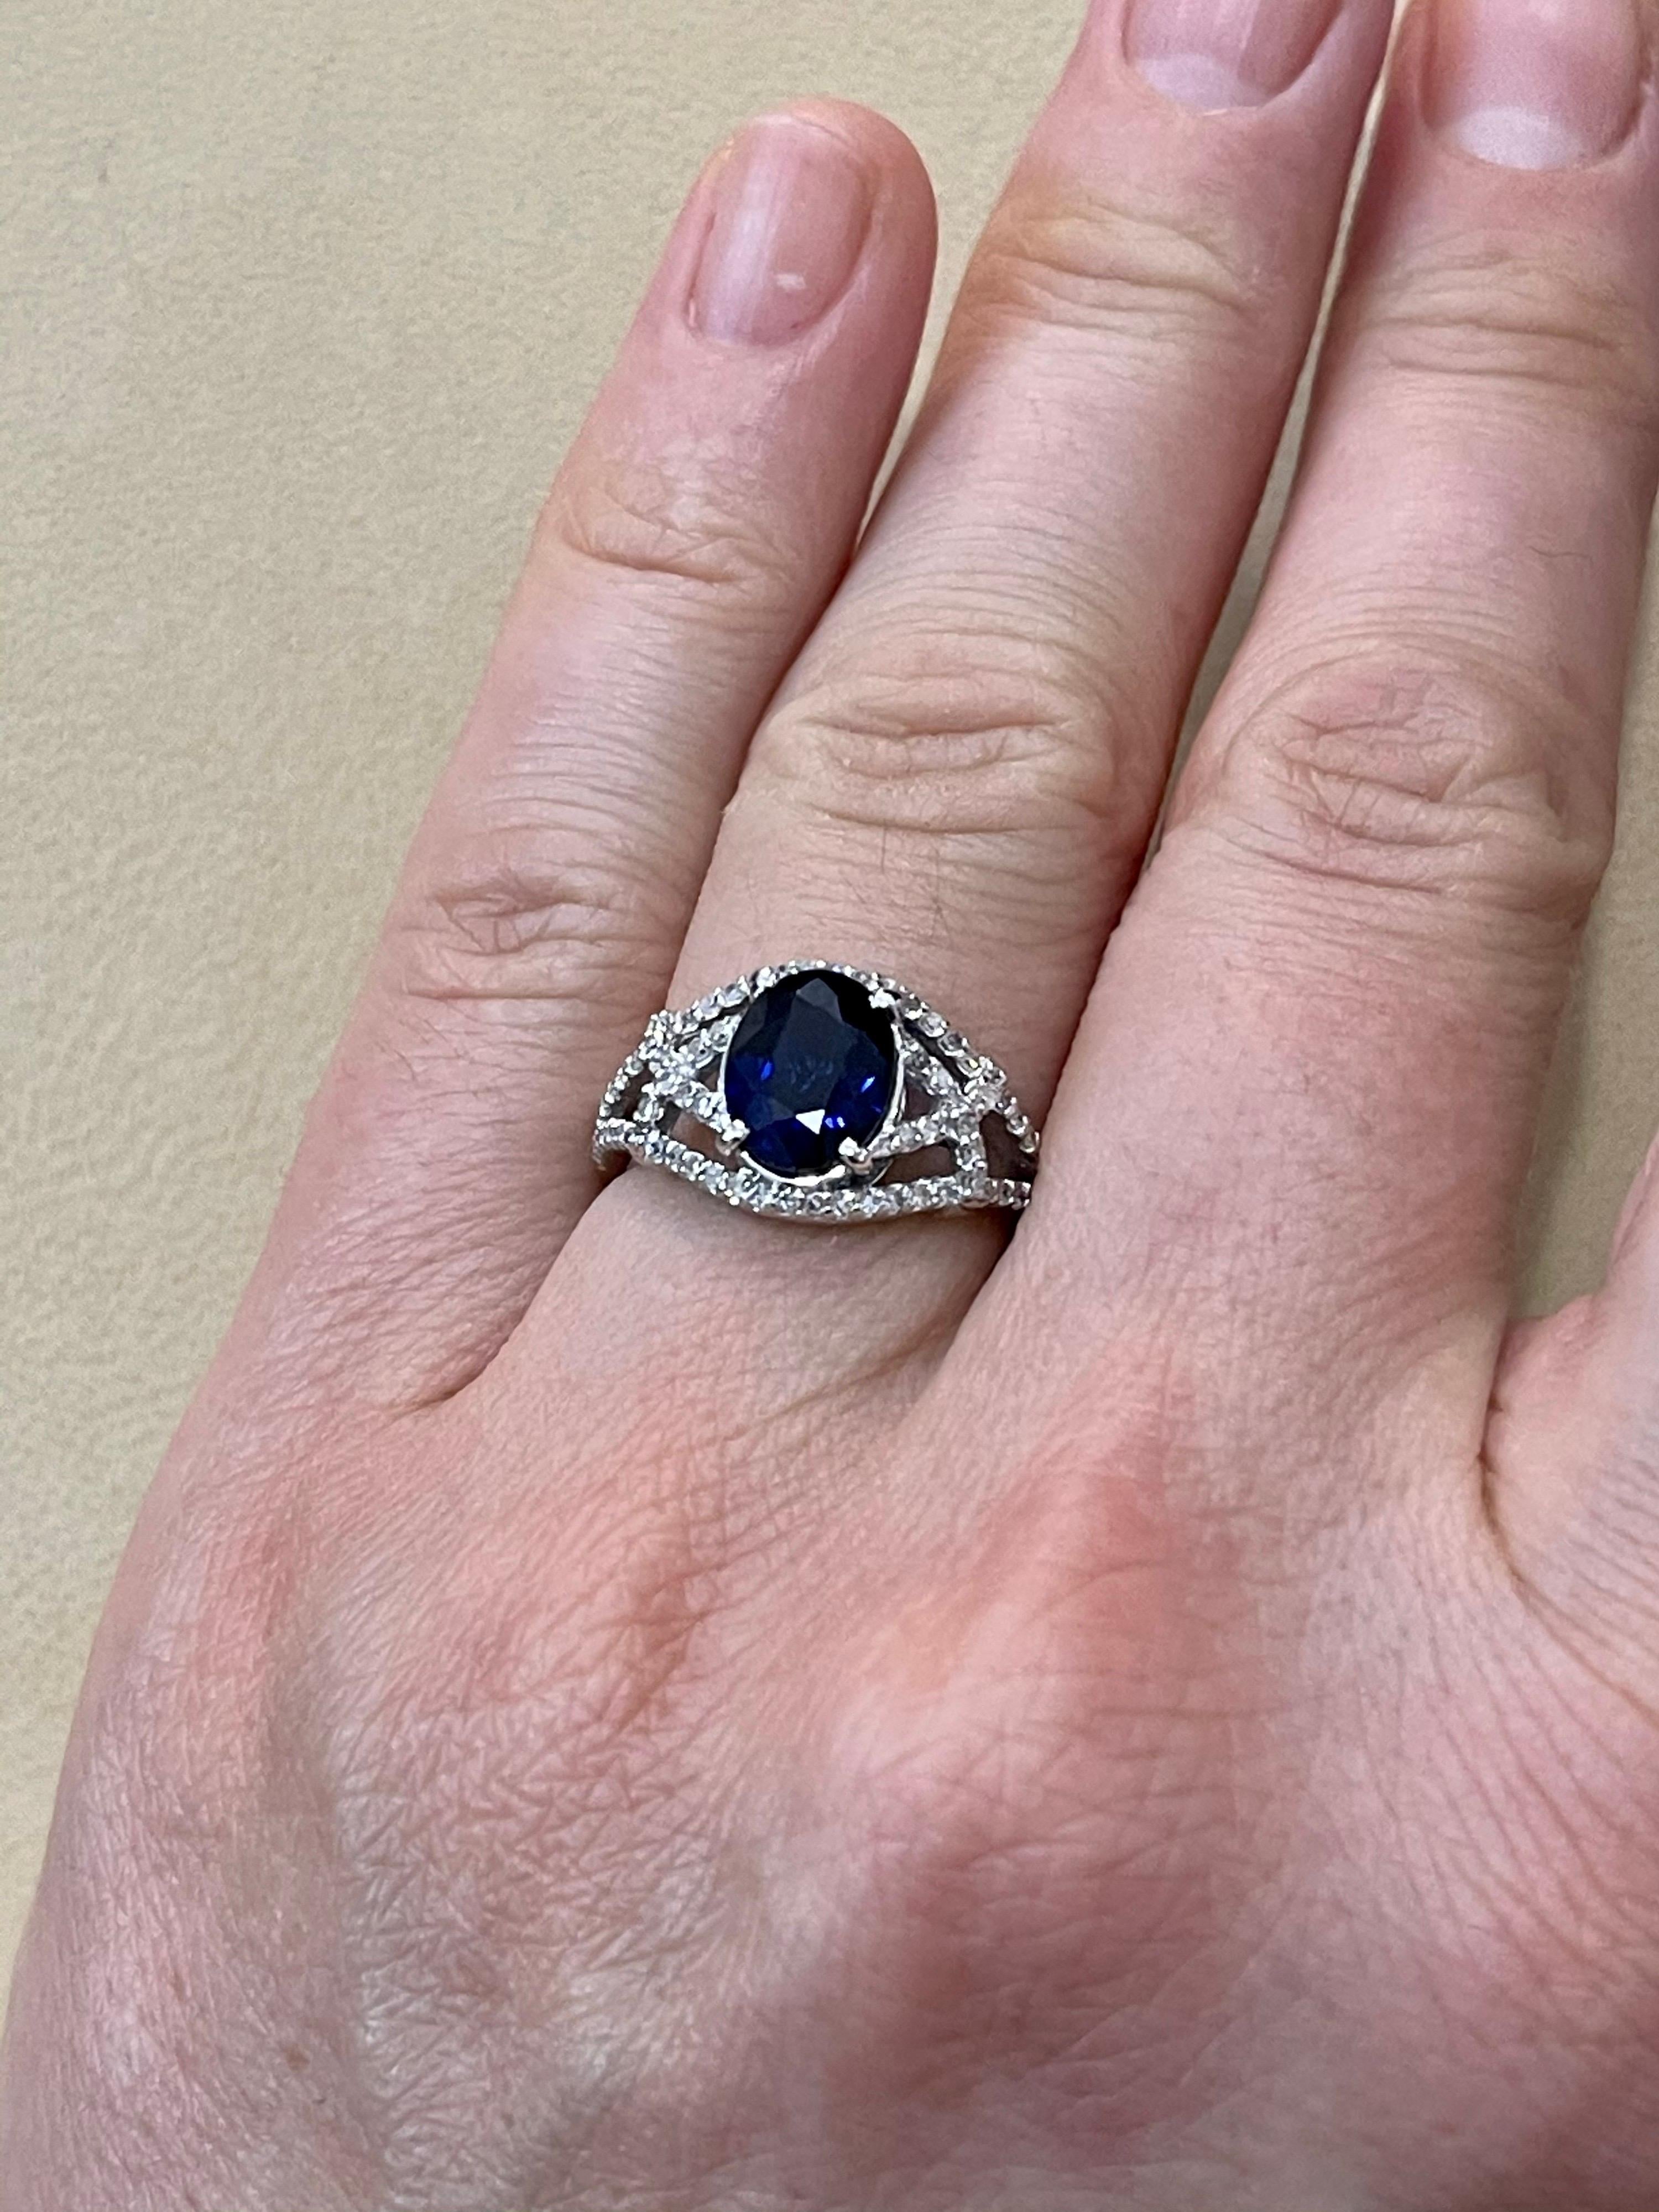 Oval Cut Effy's 1.9Ct Blue Sapphire & 0.36Ct Diamond Cocktail Ring in 14 Karat White Gold